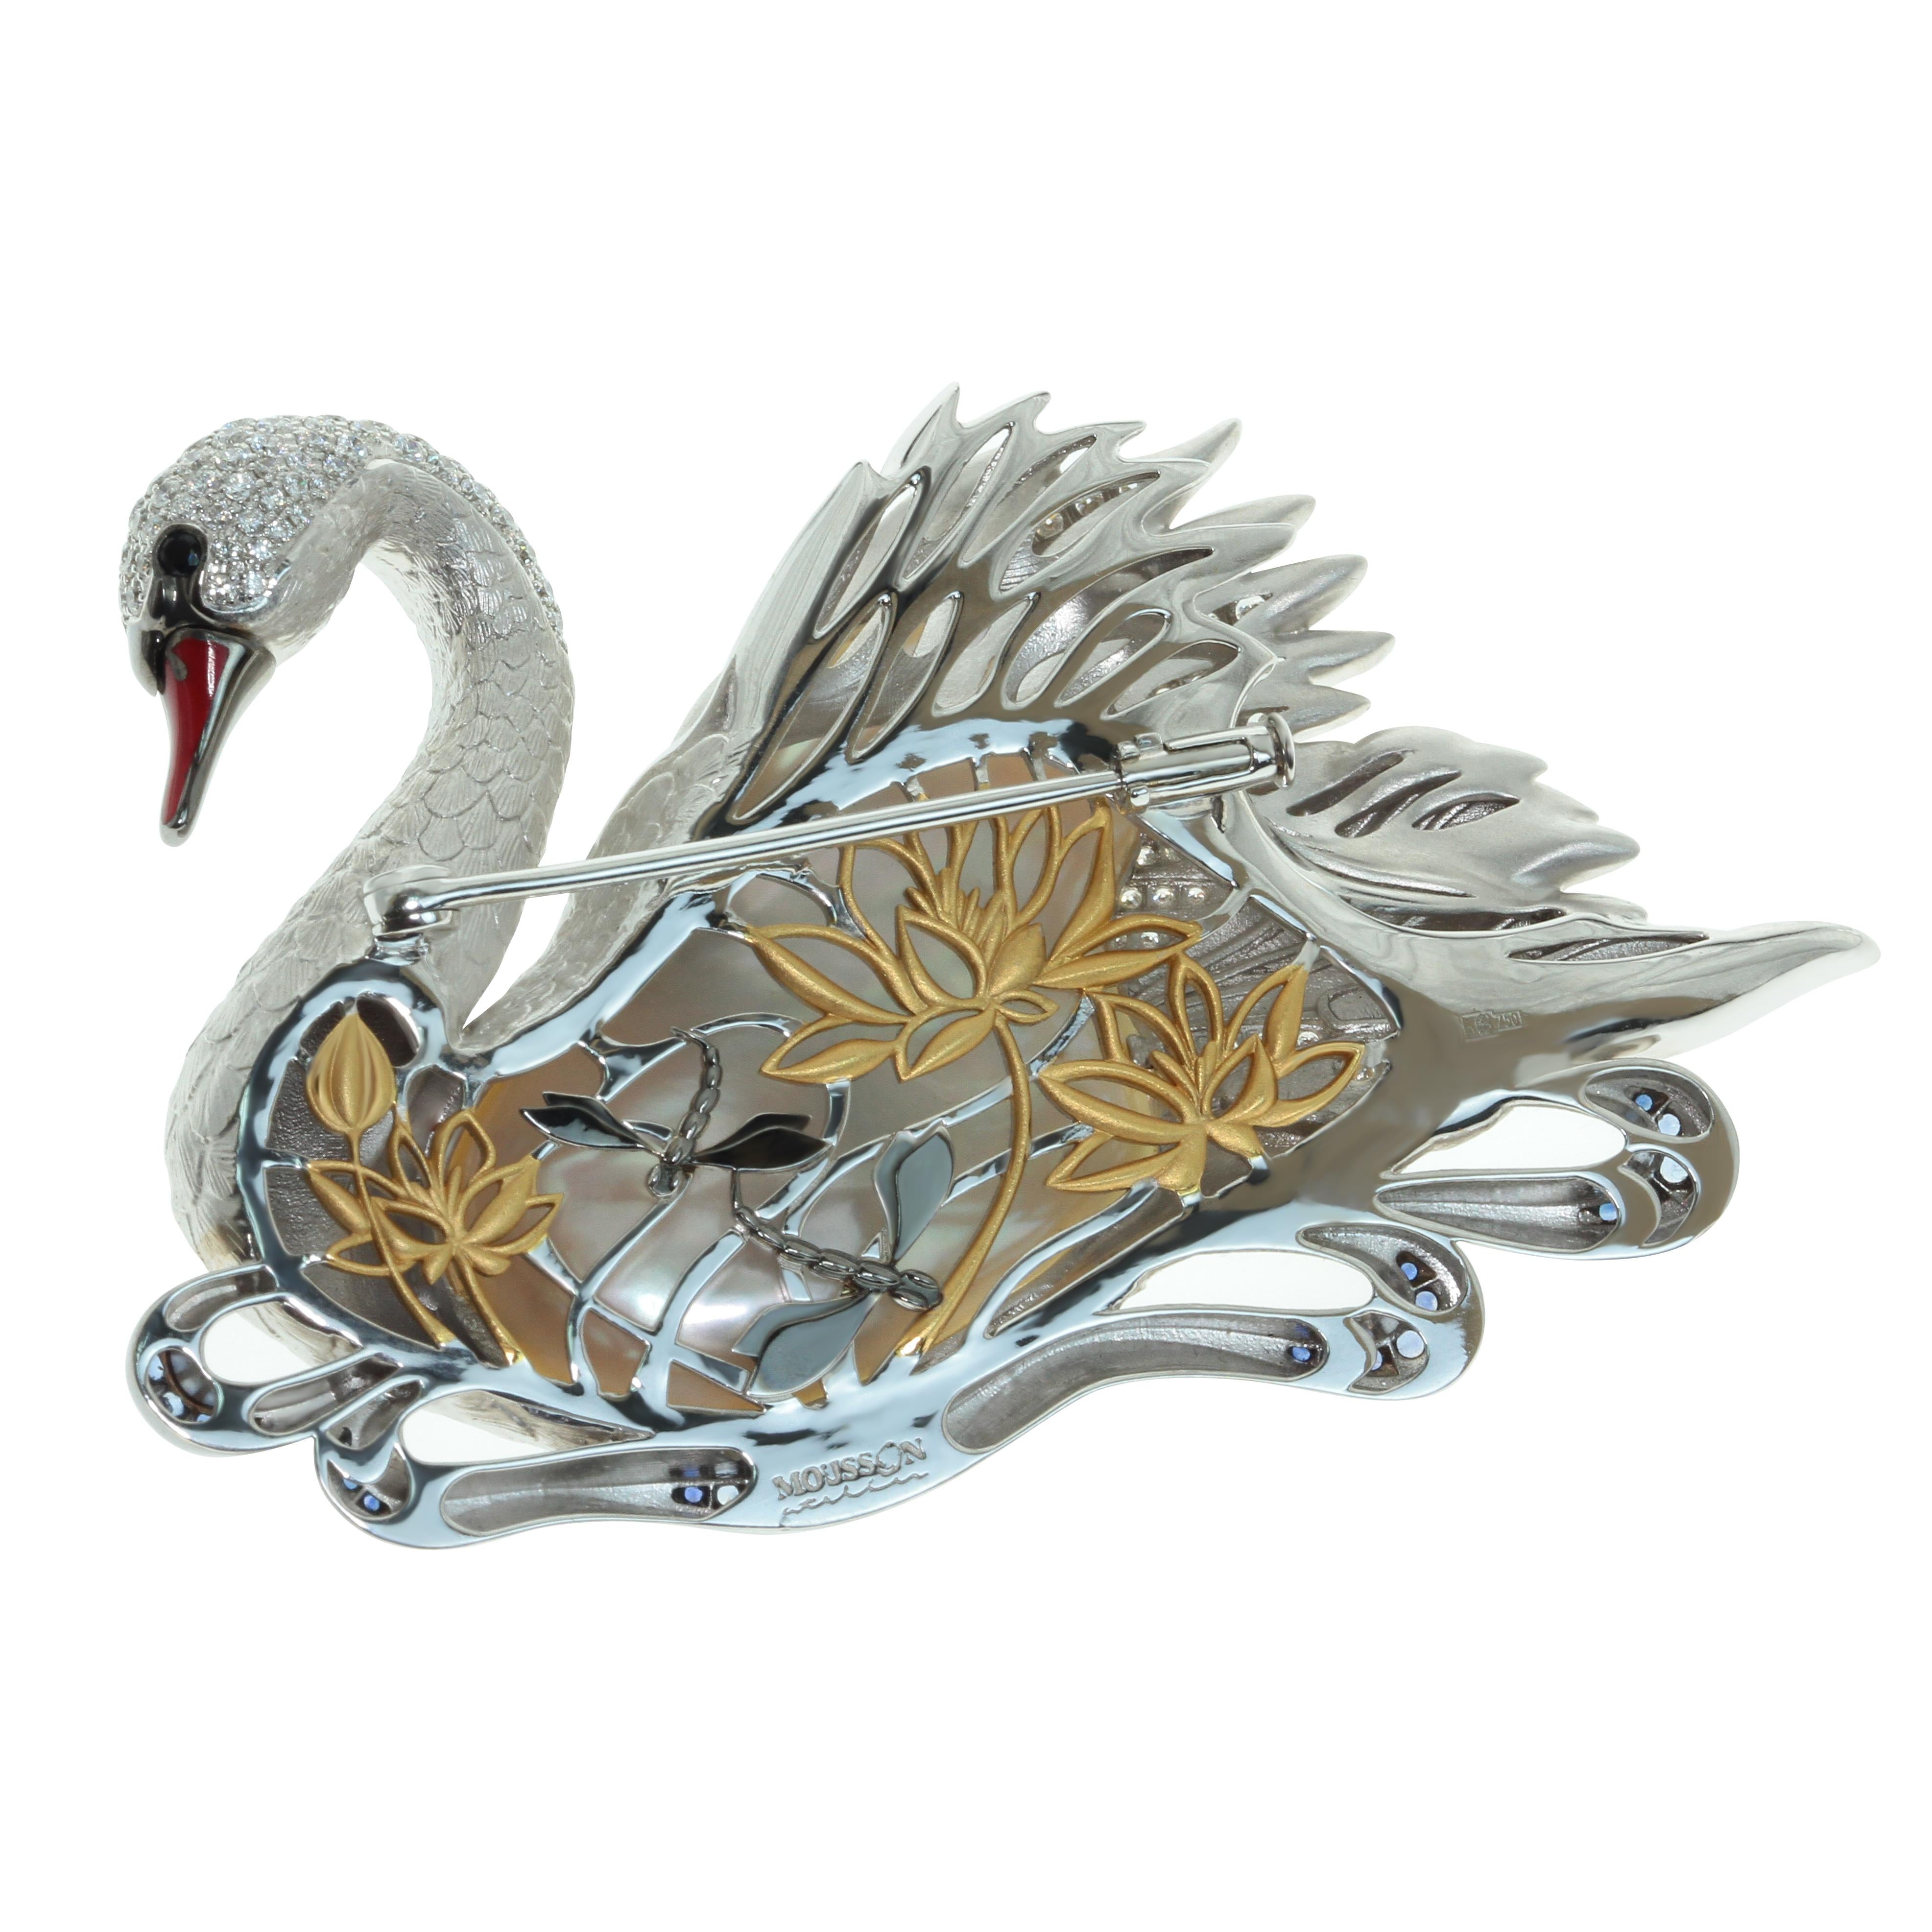 Diamond Freshwater Pearl 18 Karat White Gold Swan Brooch

Mousson Atelier demonstrates how the Pearl and stones can work together to create exceptional piece of art. In the the center stone of this brooch is a beautiful Baroque Pearl. It is enhanced